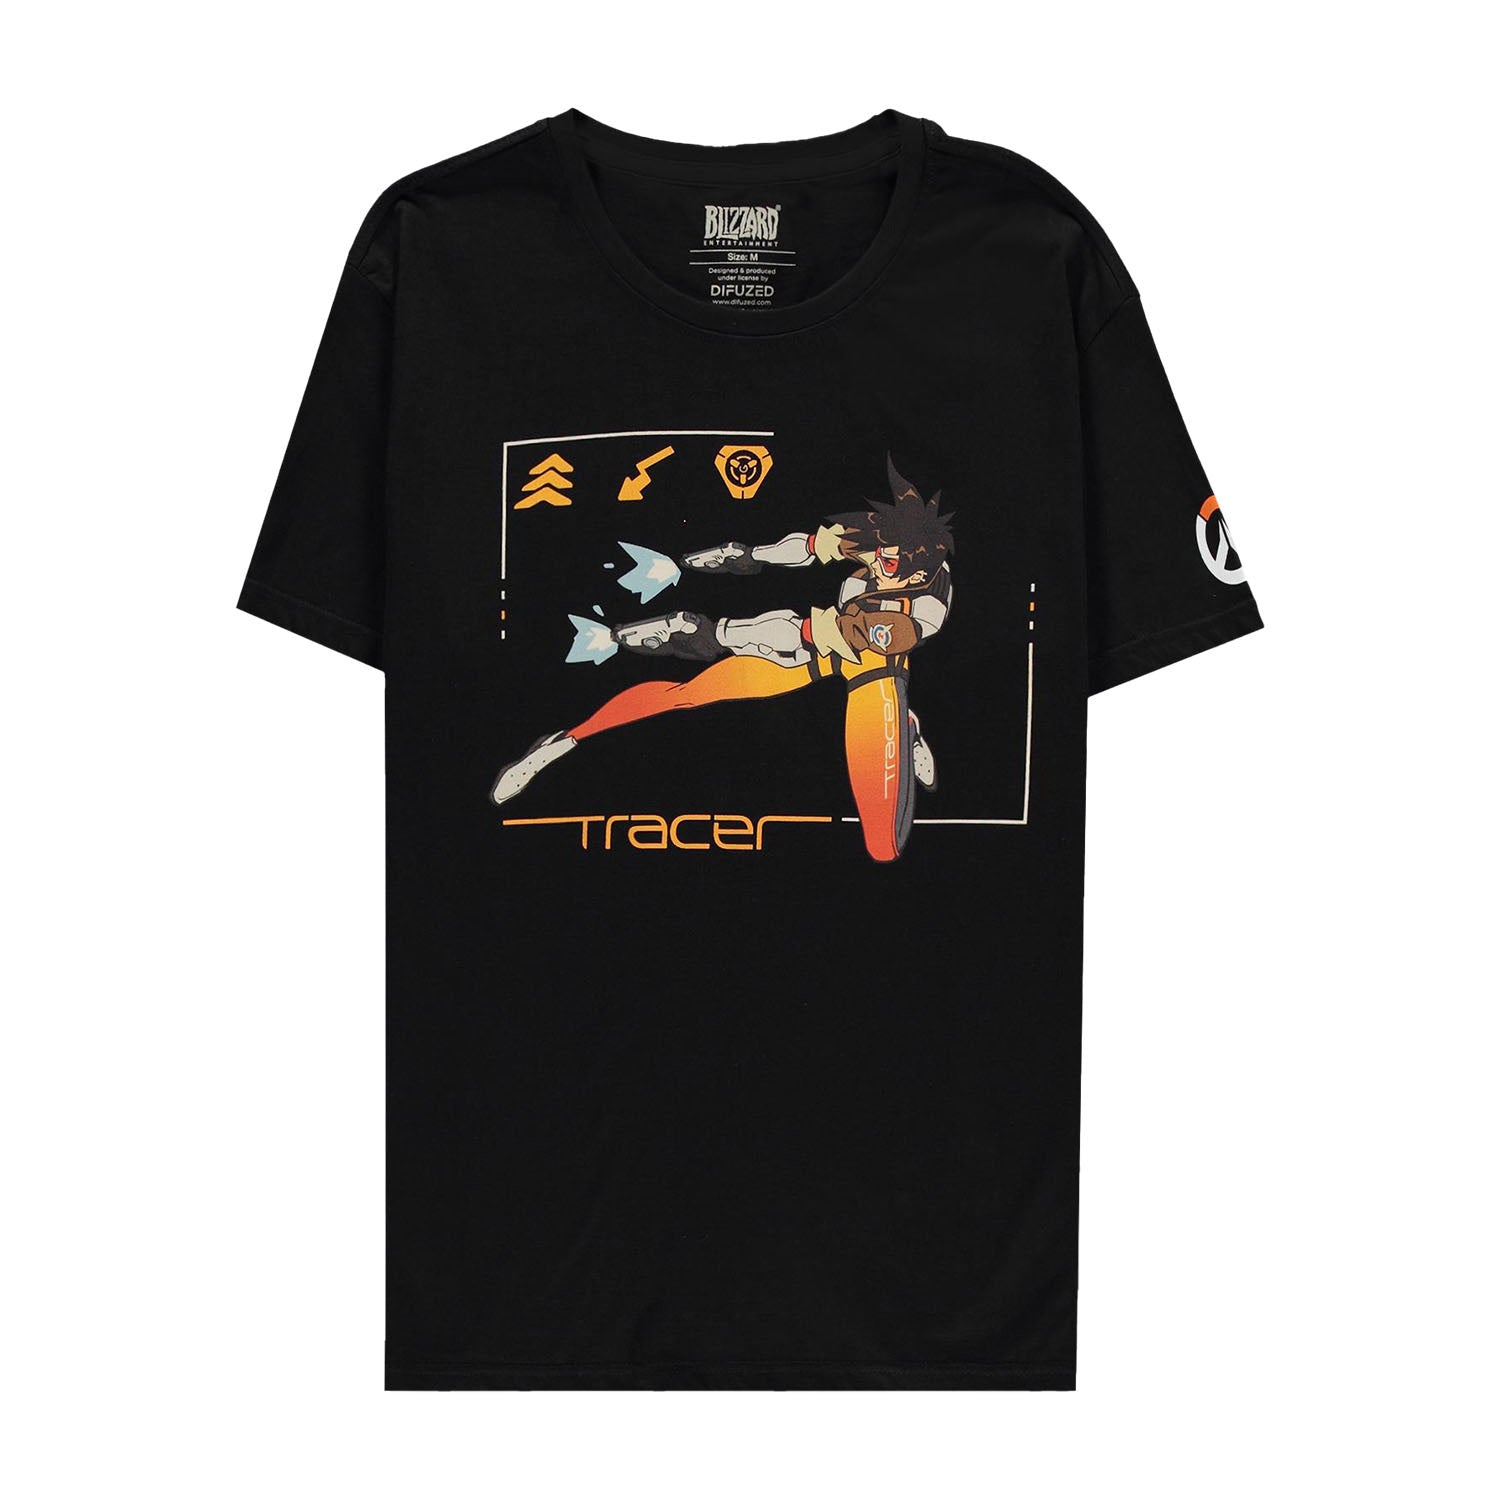 Overwatch Tracer Black Pew Pew Pew! T-Shirt - Front View